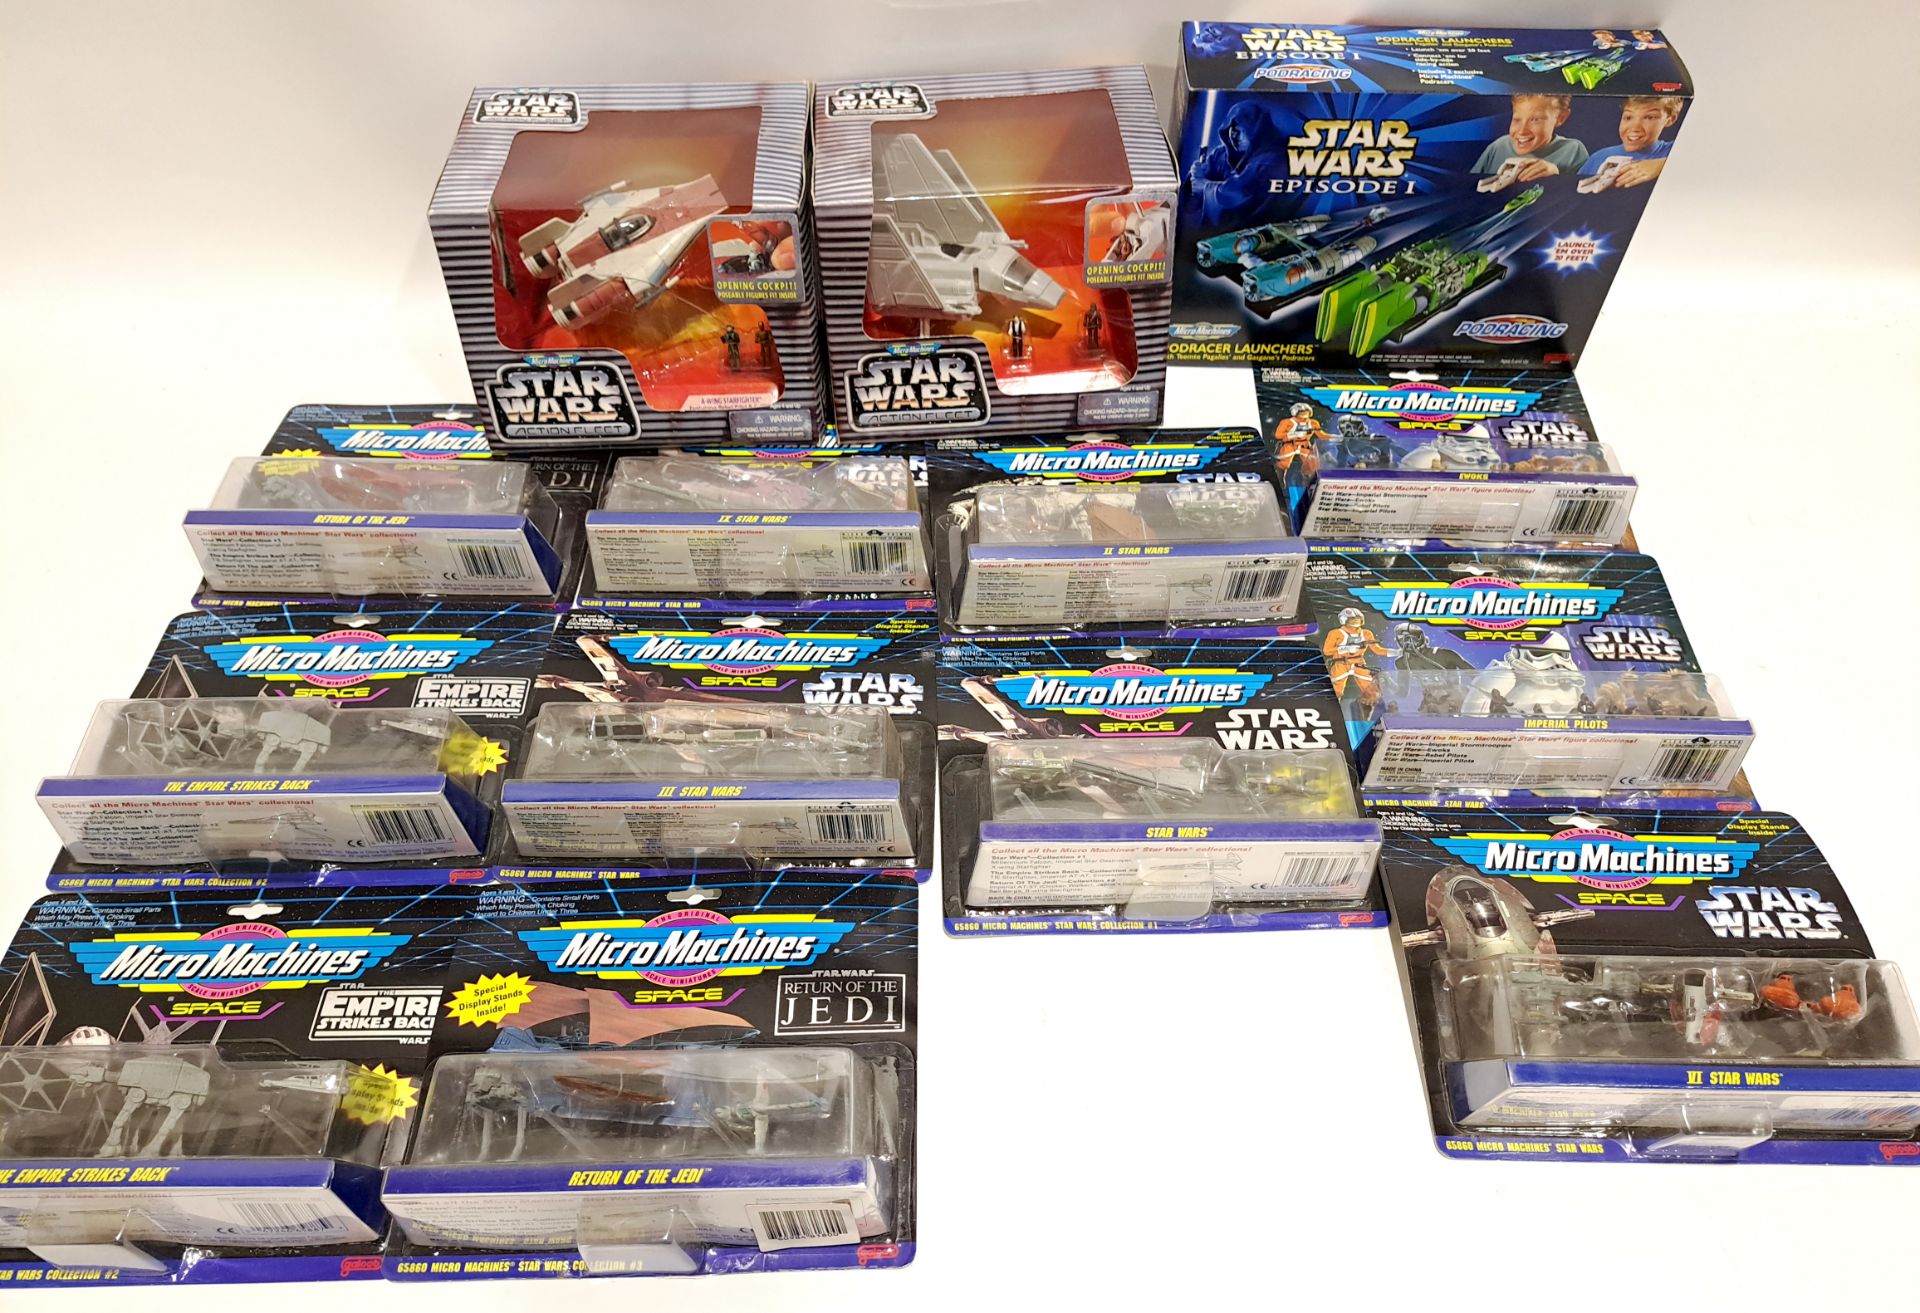 Quantity of Galoob Star Wars MicroMachines